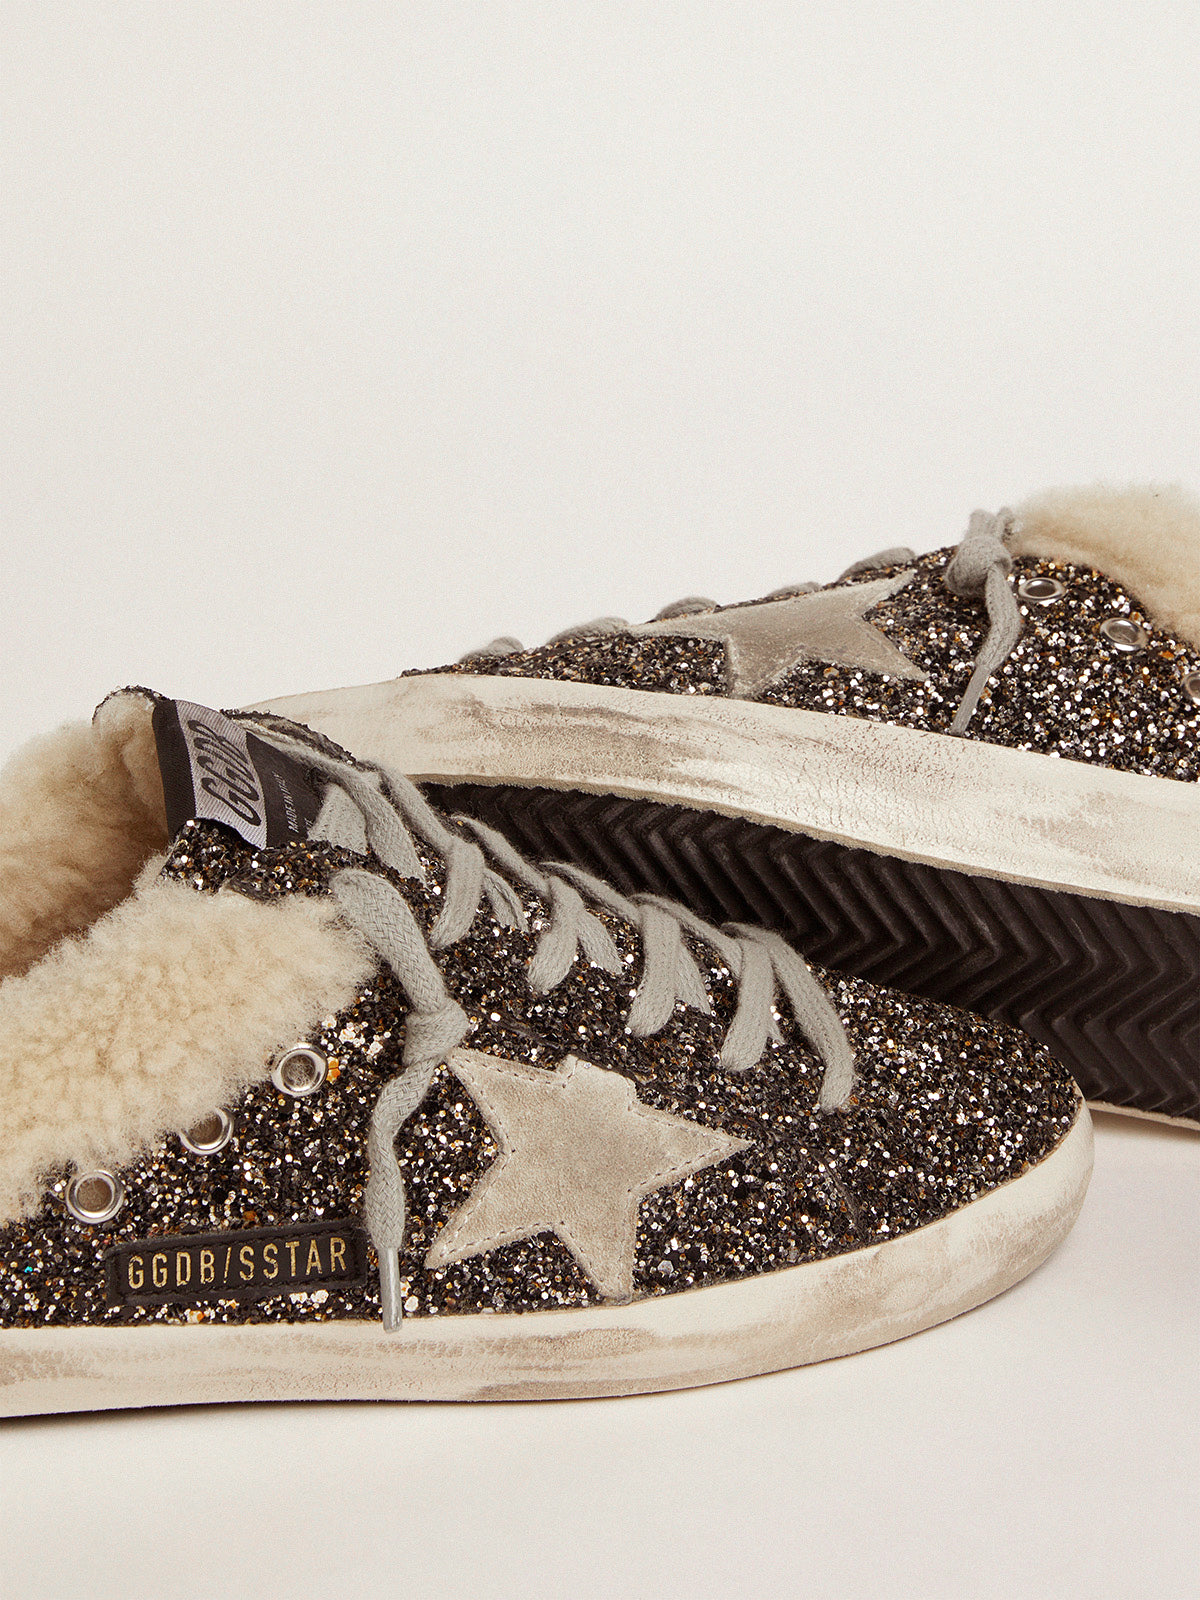 Golden Goose Superstar Sabot Glitter Sneakers in Black Gold, Beige and Ice available at The New Trend